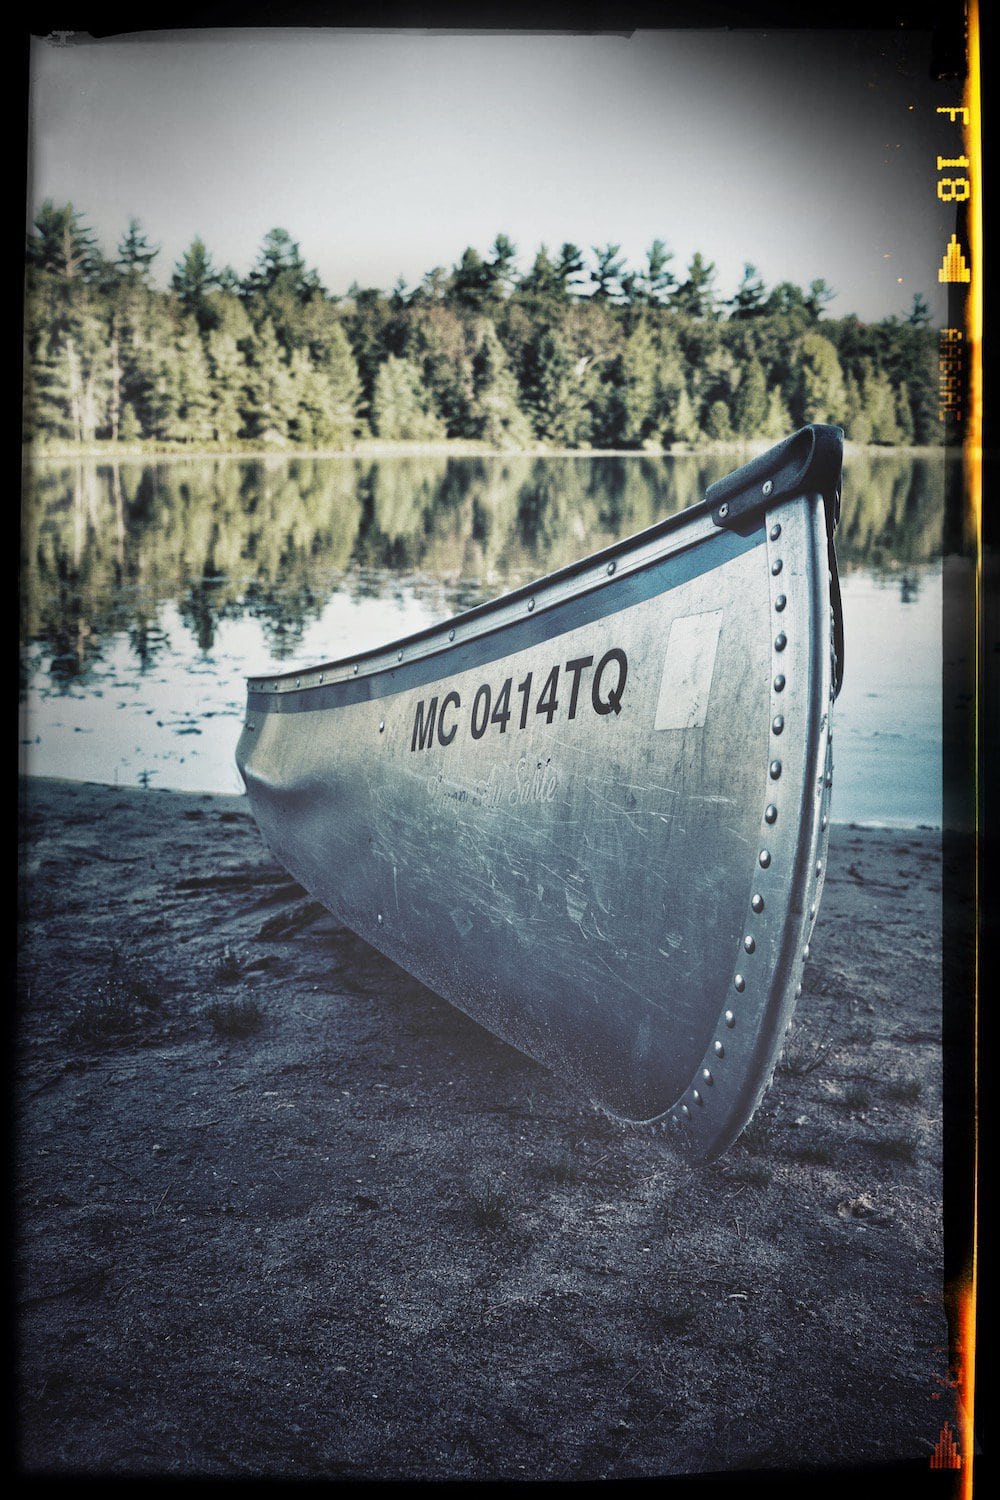 Photograph of a aluminum canoe the bank of a lake, edited, color and contrast are increased. Has a film boarder